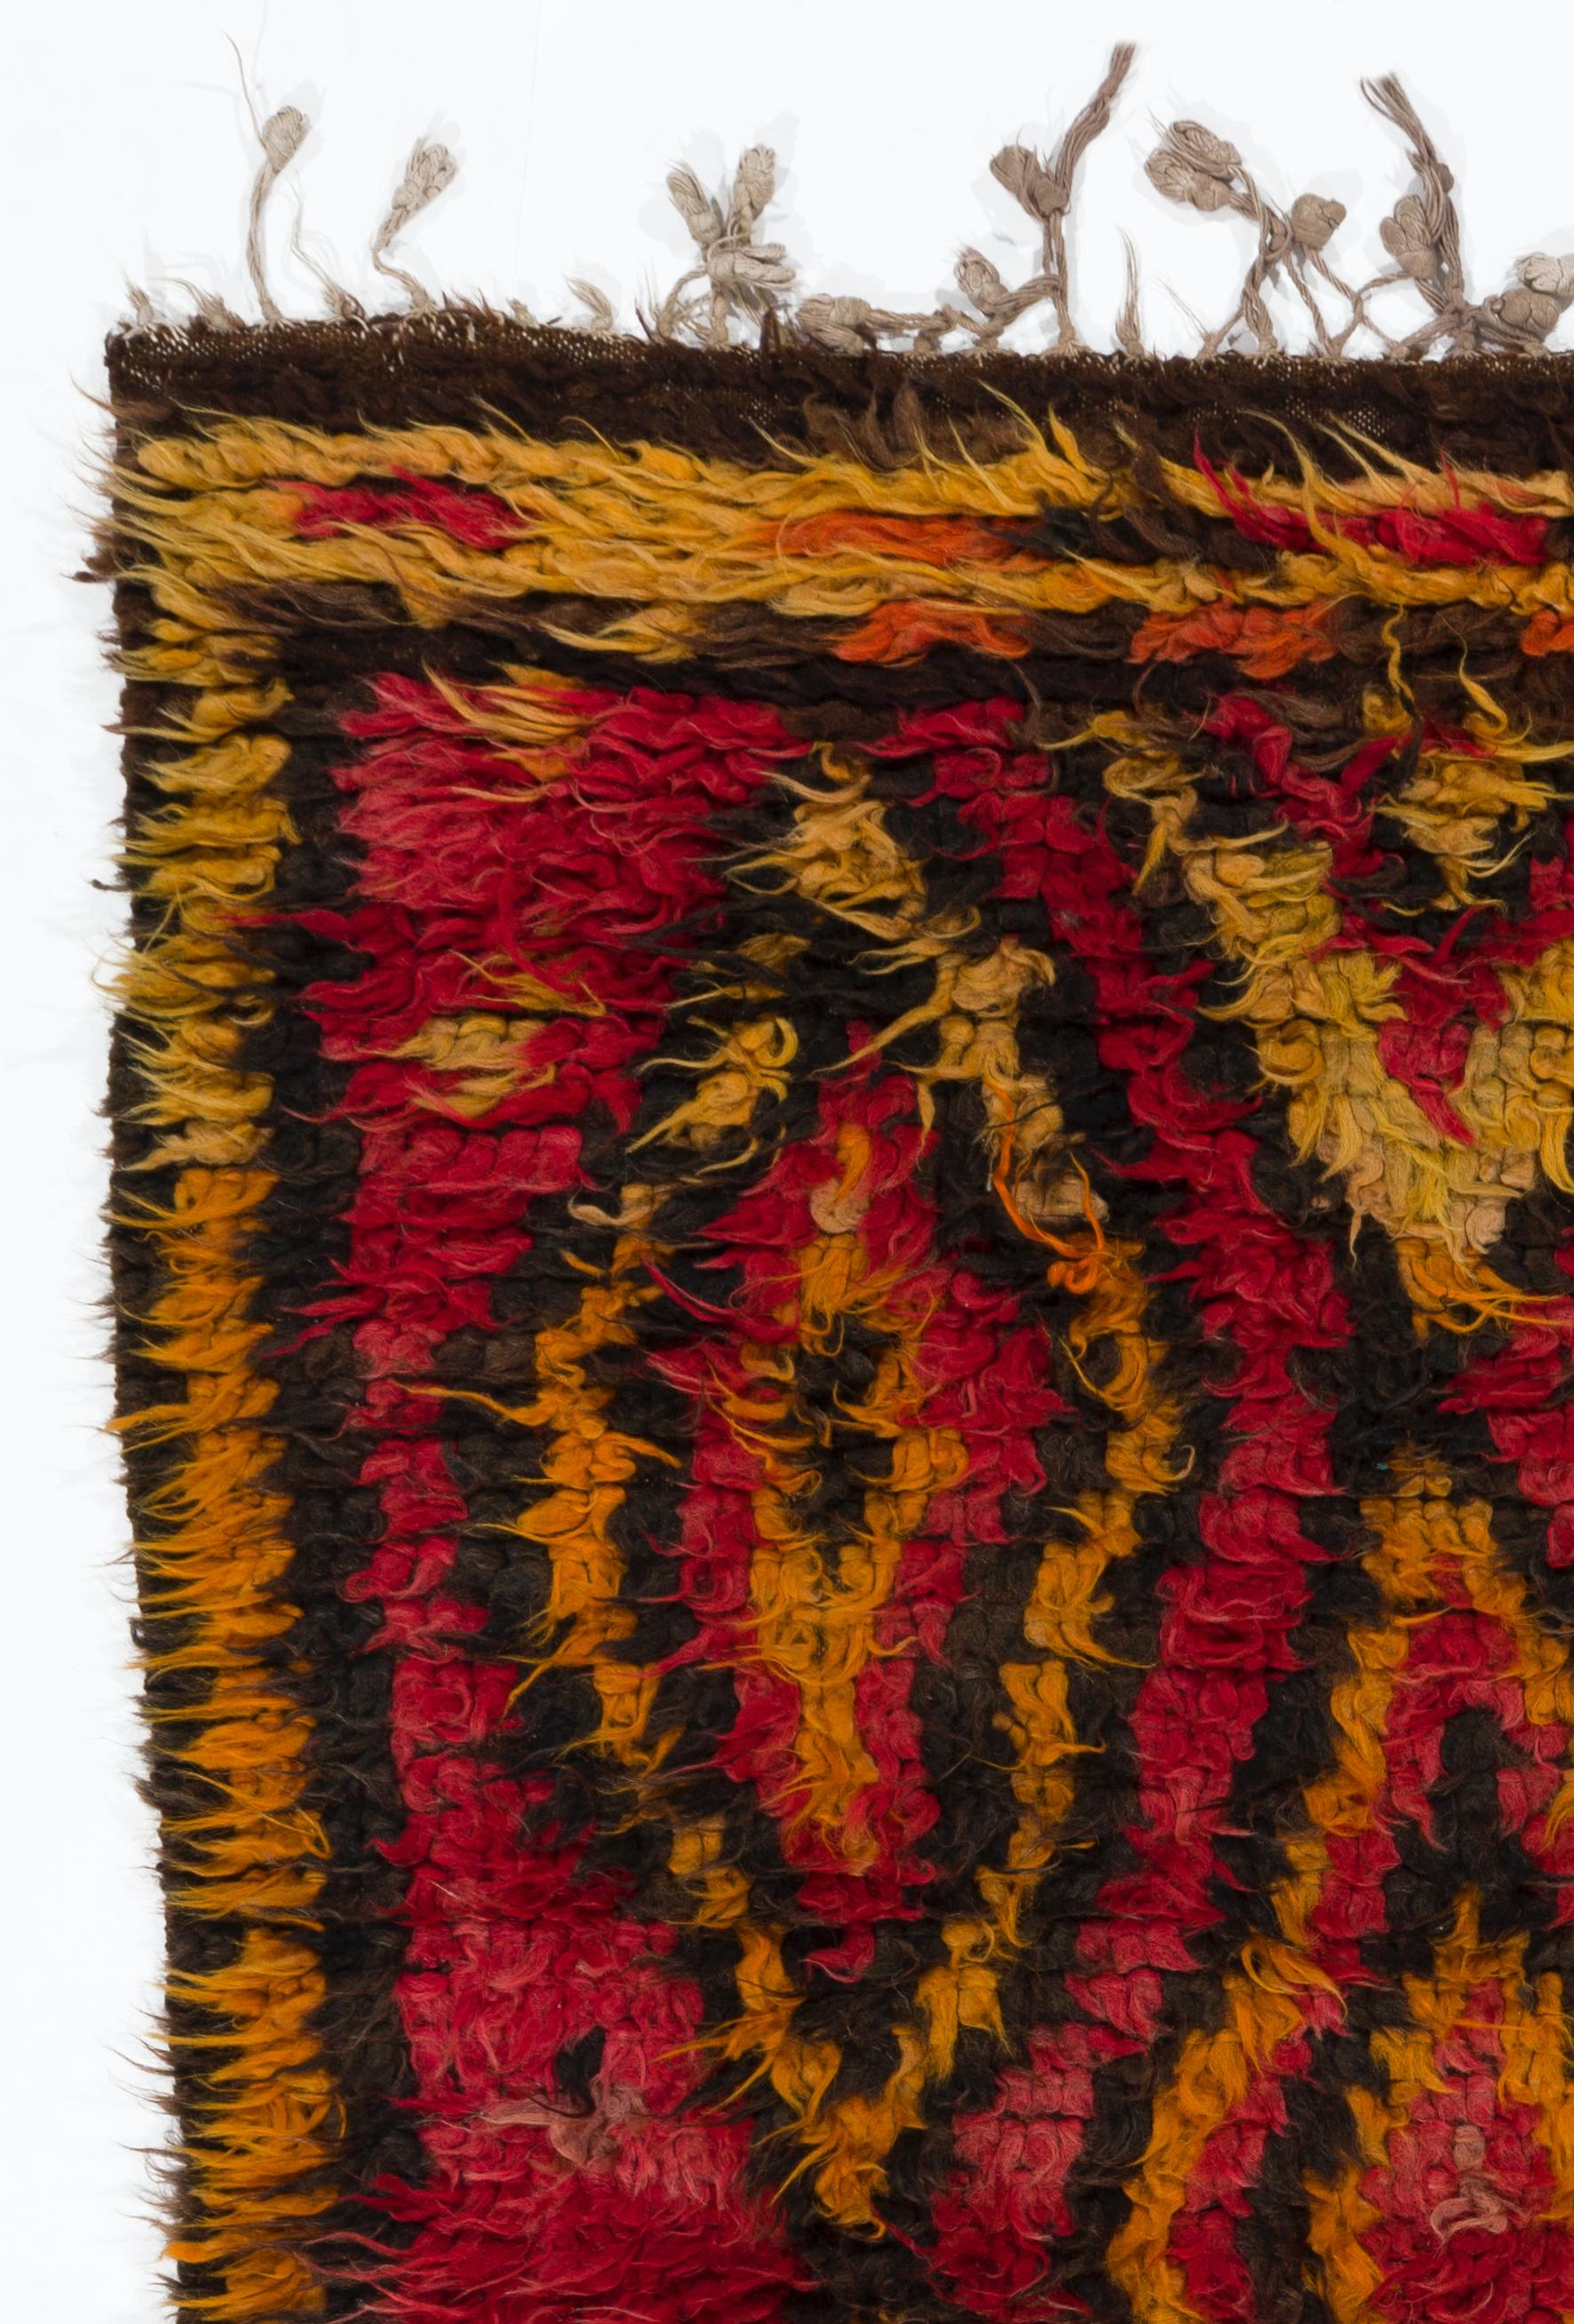 These charming small rugs with lustrous wool pile were produced for daily use by nomads and villagers in Konya, Central Anatolia until 1970s. Today they are considered collectible items as each one is one-of-a-kind and representing a diminishing